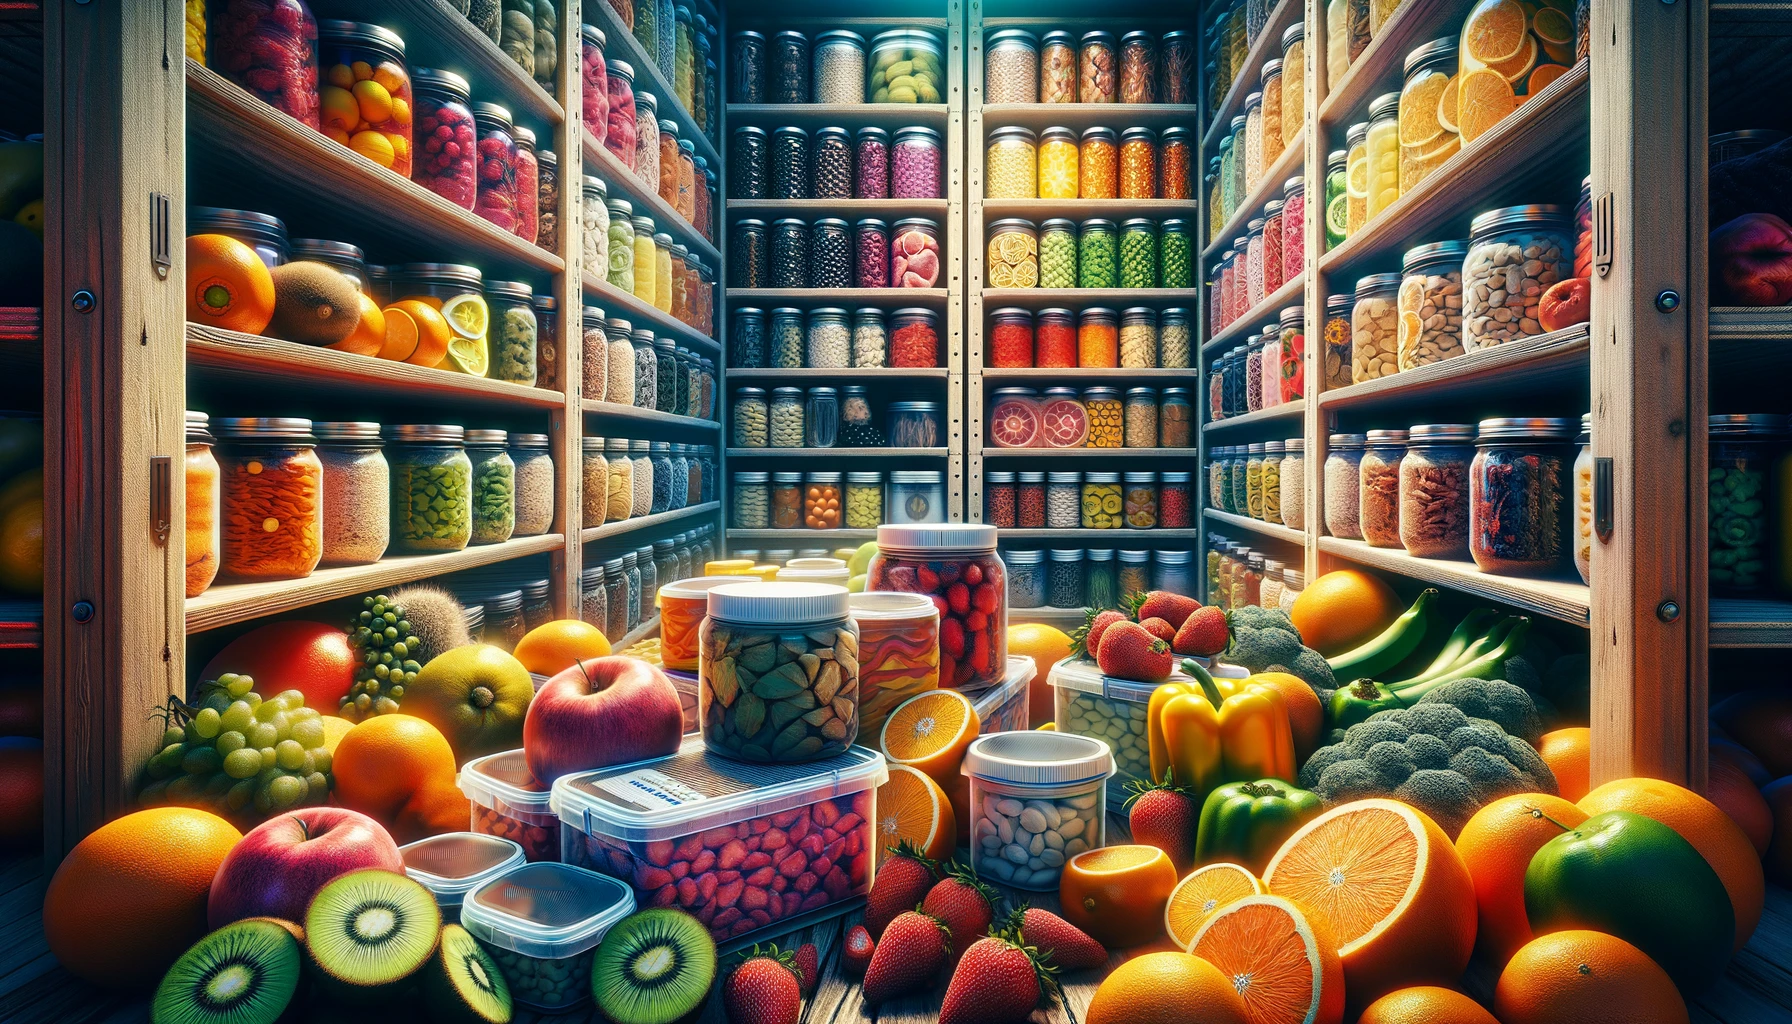 Enhanced prepper's storeroom dedicated to Vitamin C-rich emergency foods, featuring an array of citrus fruits, strawberries, kiwi, and bell peppers preserved by freeze-drying and vacuum sealing, with prominent Vitamin C supplements, all organized in color-coded sections for optimal nutritional preparedness in survival situations